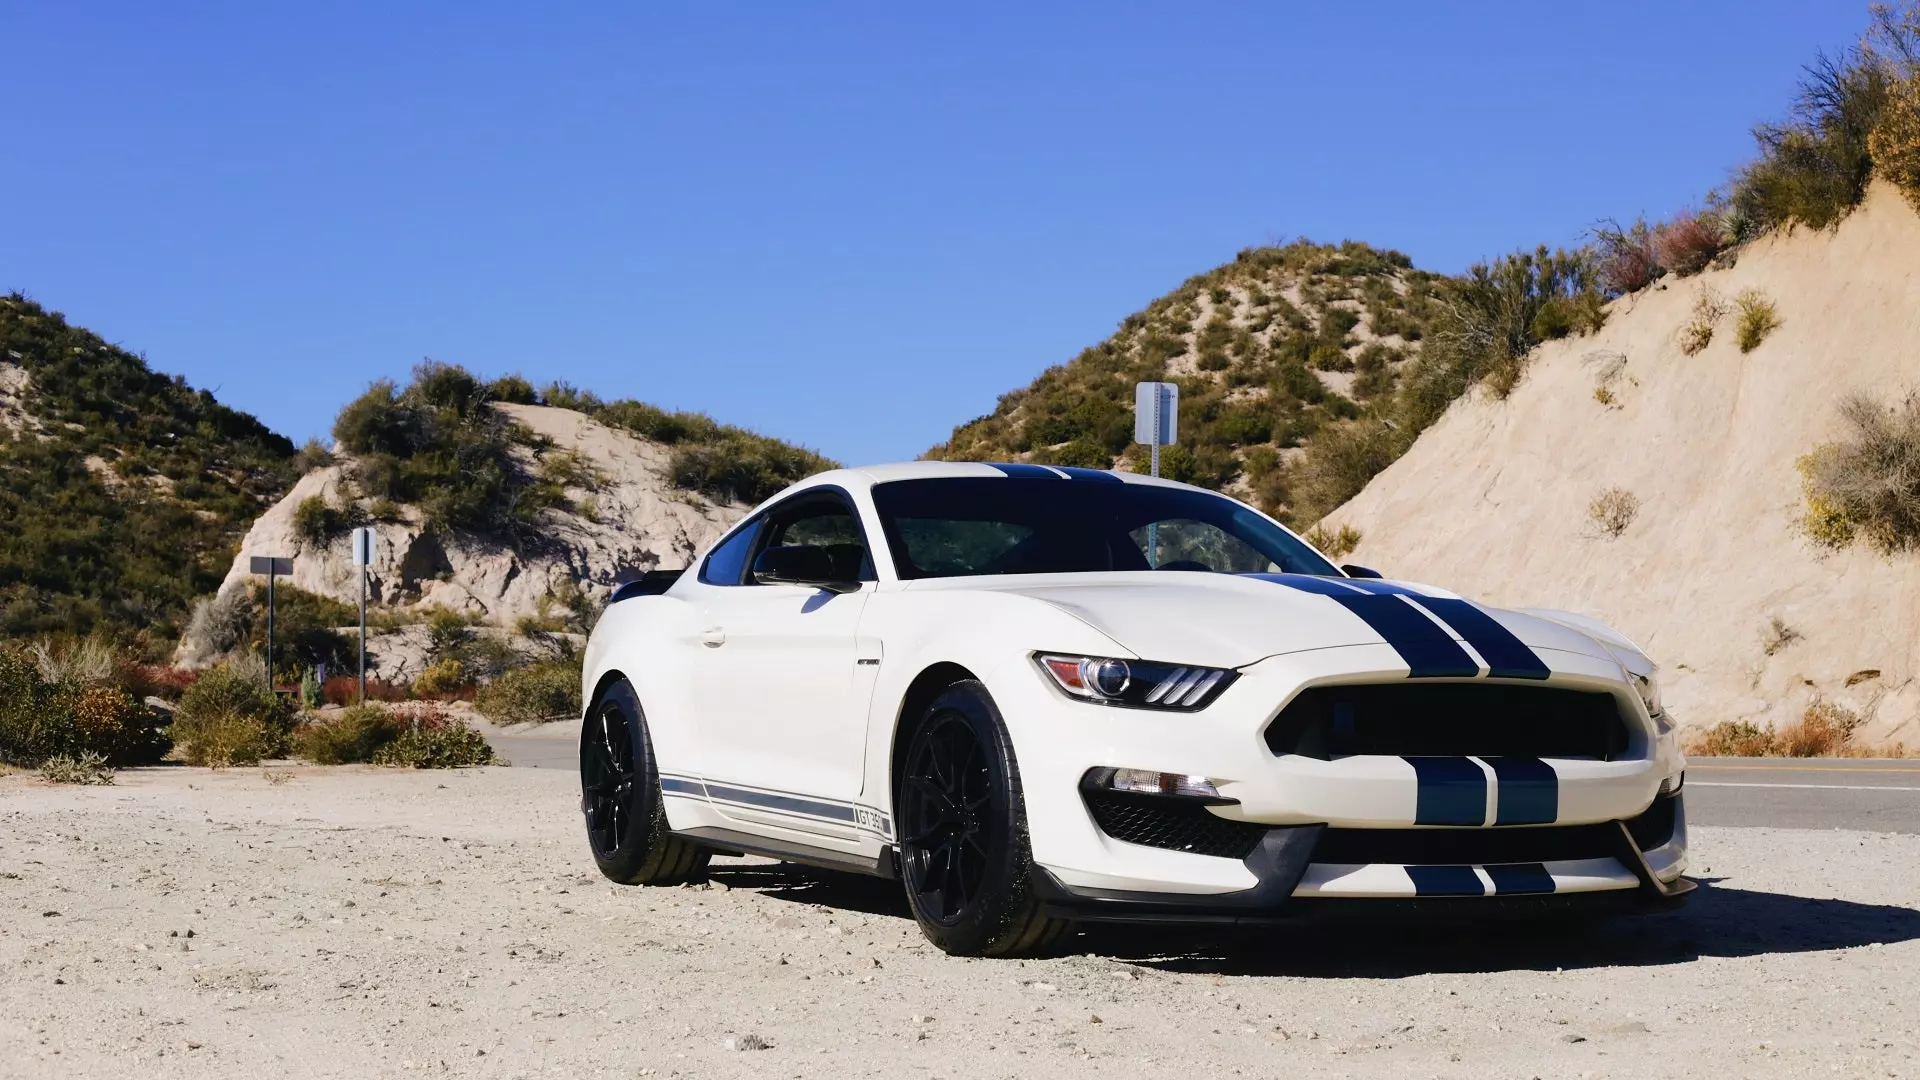 The Ford Mustang Shelby GT350 Really Is Best Appreciated on a Race Track | Autance